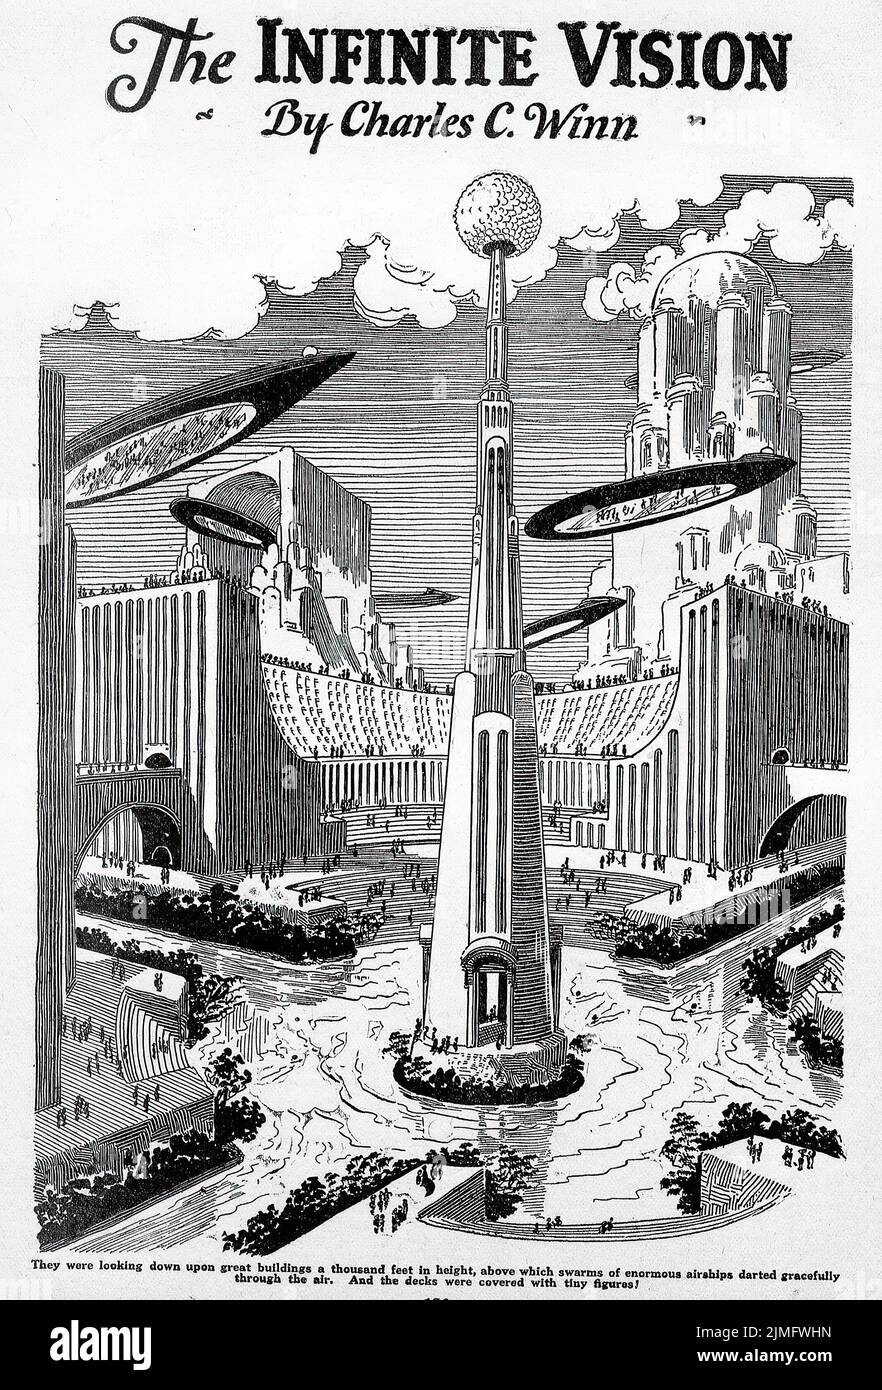 The Infinite Vision (1924) by Charles C. Winn. Illustration by Frank R. Paul from Amazing Stories, May 1926. Stock Photo